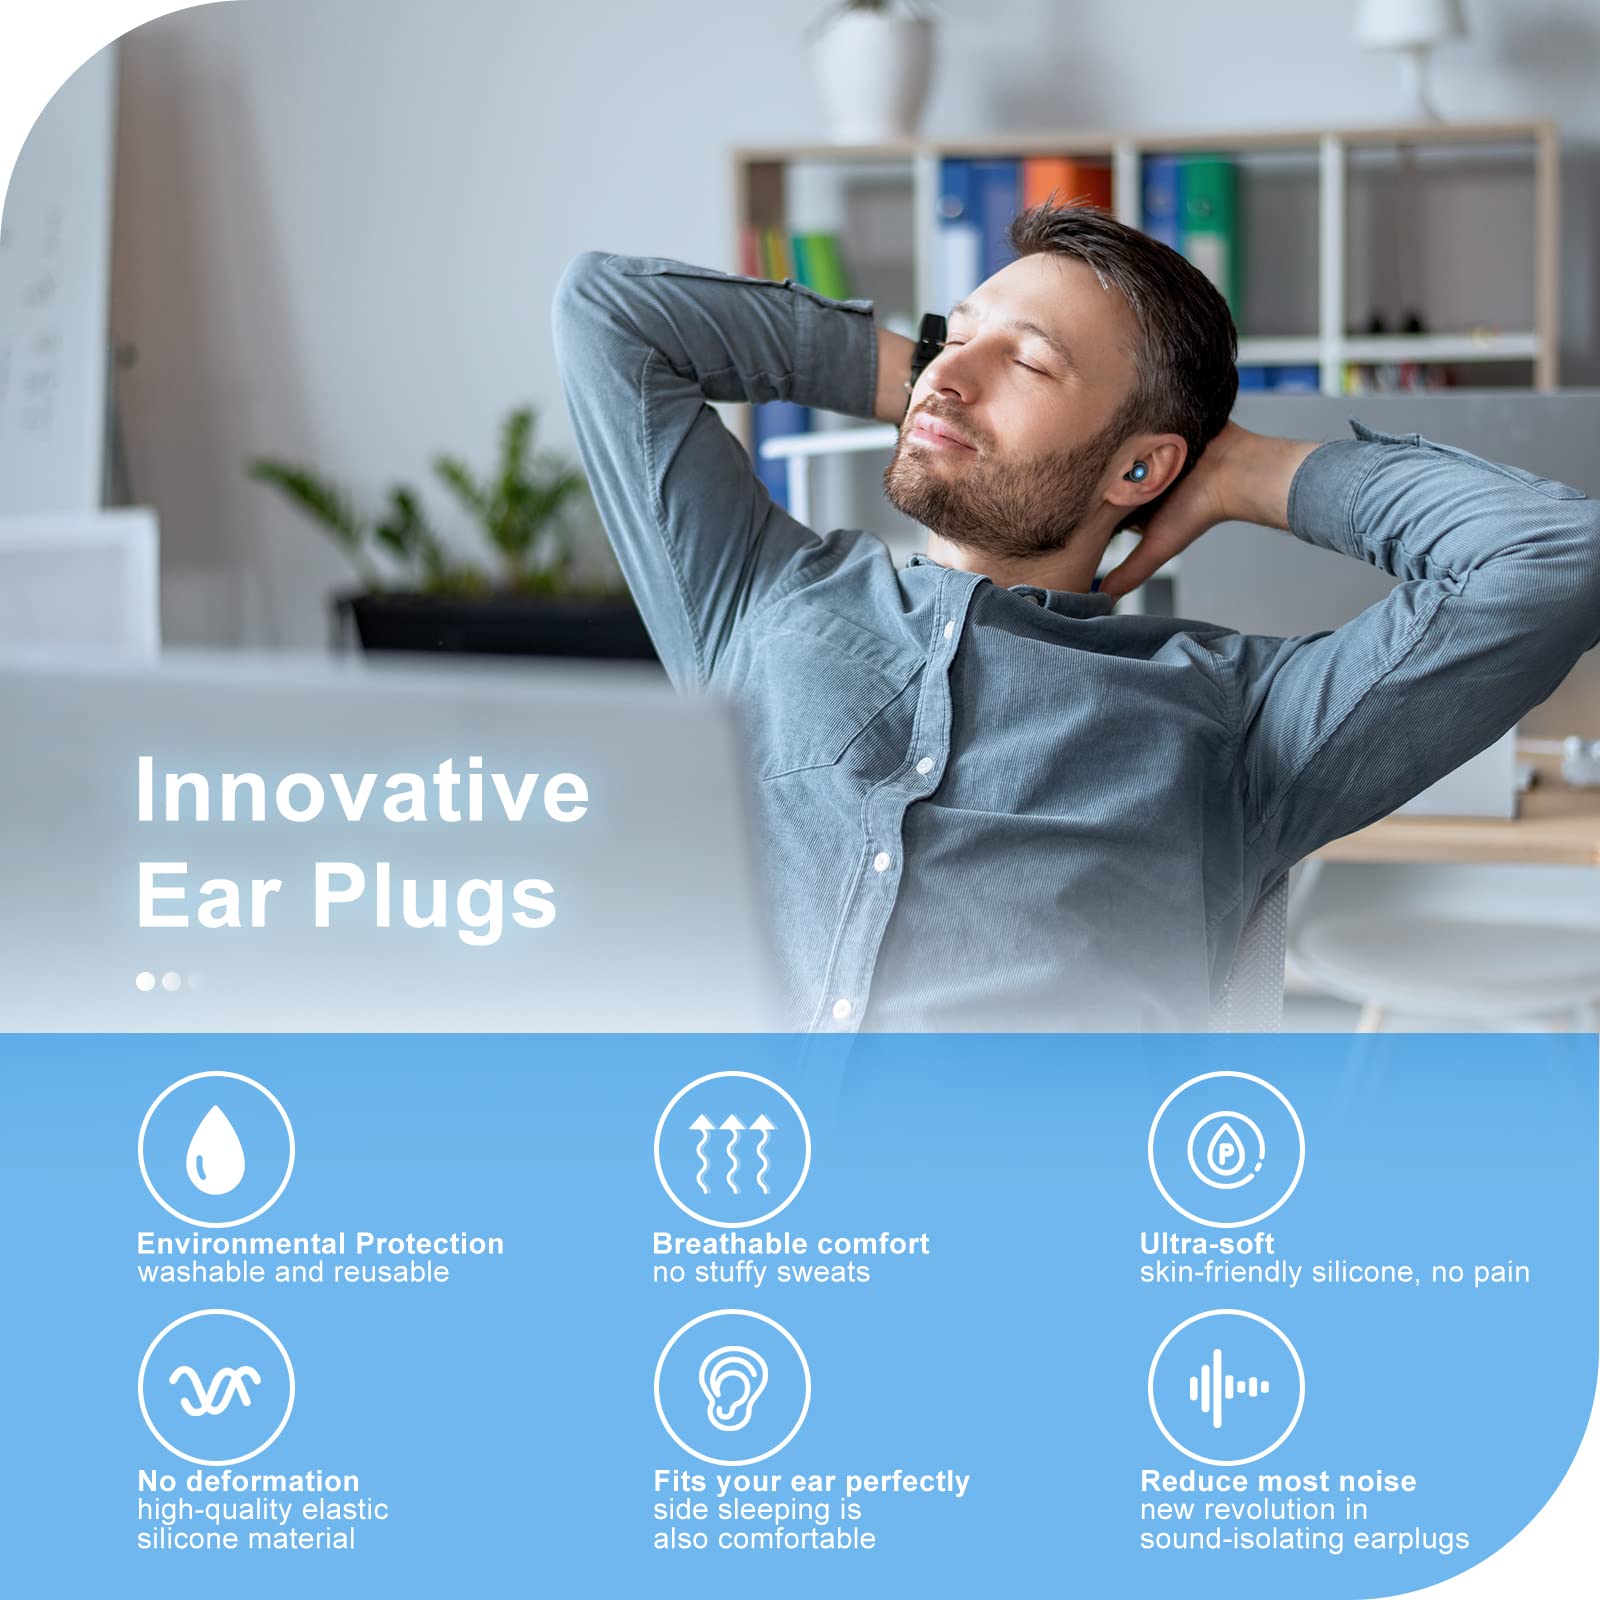 Ear Plugs for Sleeping Noise Cancelling - Soft Silicone Reusable Earplugs Hearing Protection Noise Reduction Ear Plugs for Sleep, Snoring, Concerts, Studying, Noise Sensitivity & Flights - 27dB